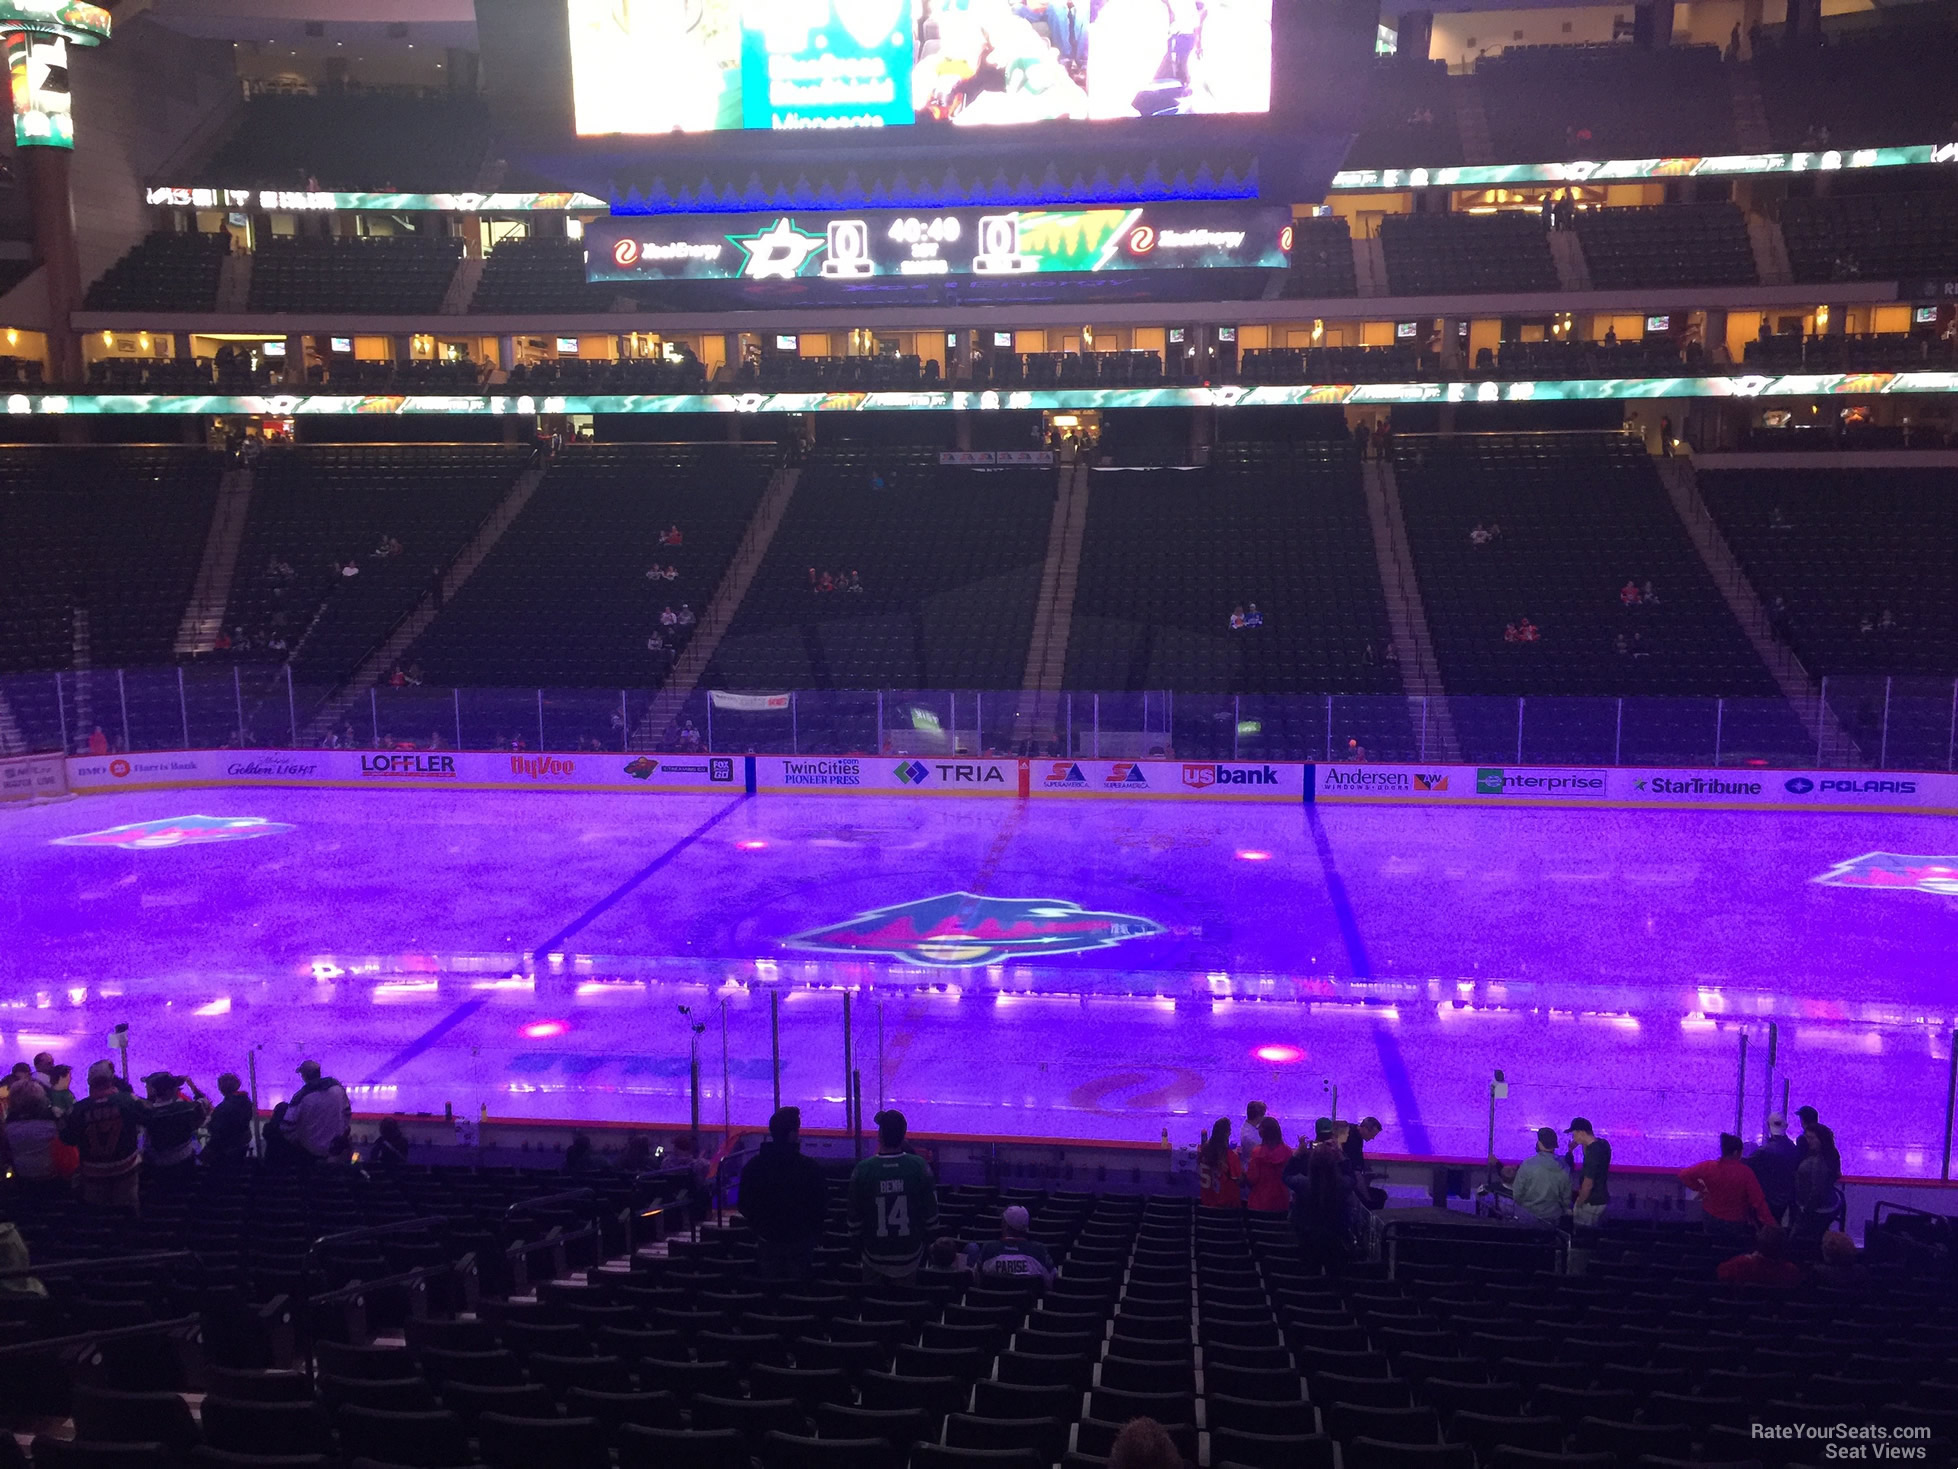 section 116, row 24 seat view  for hockey - xcel energy center